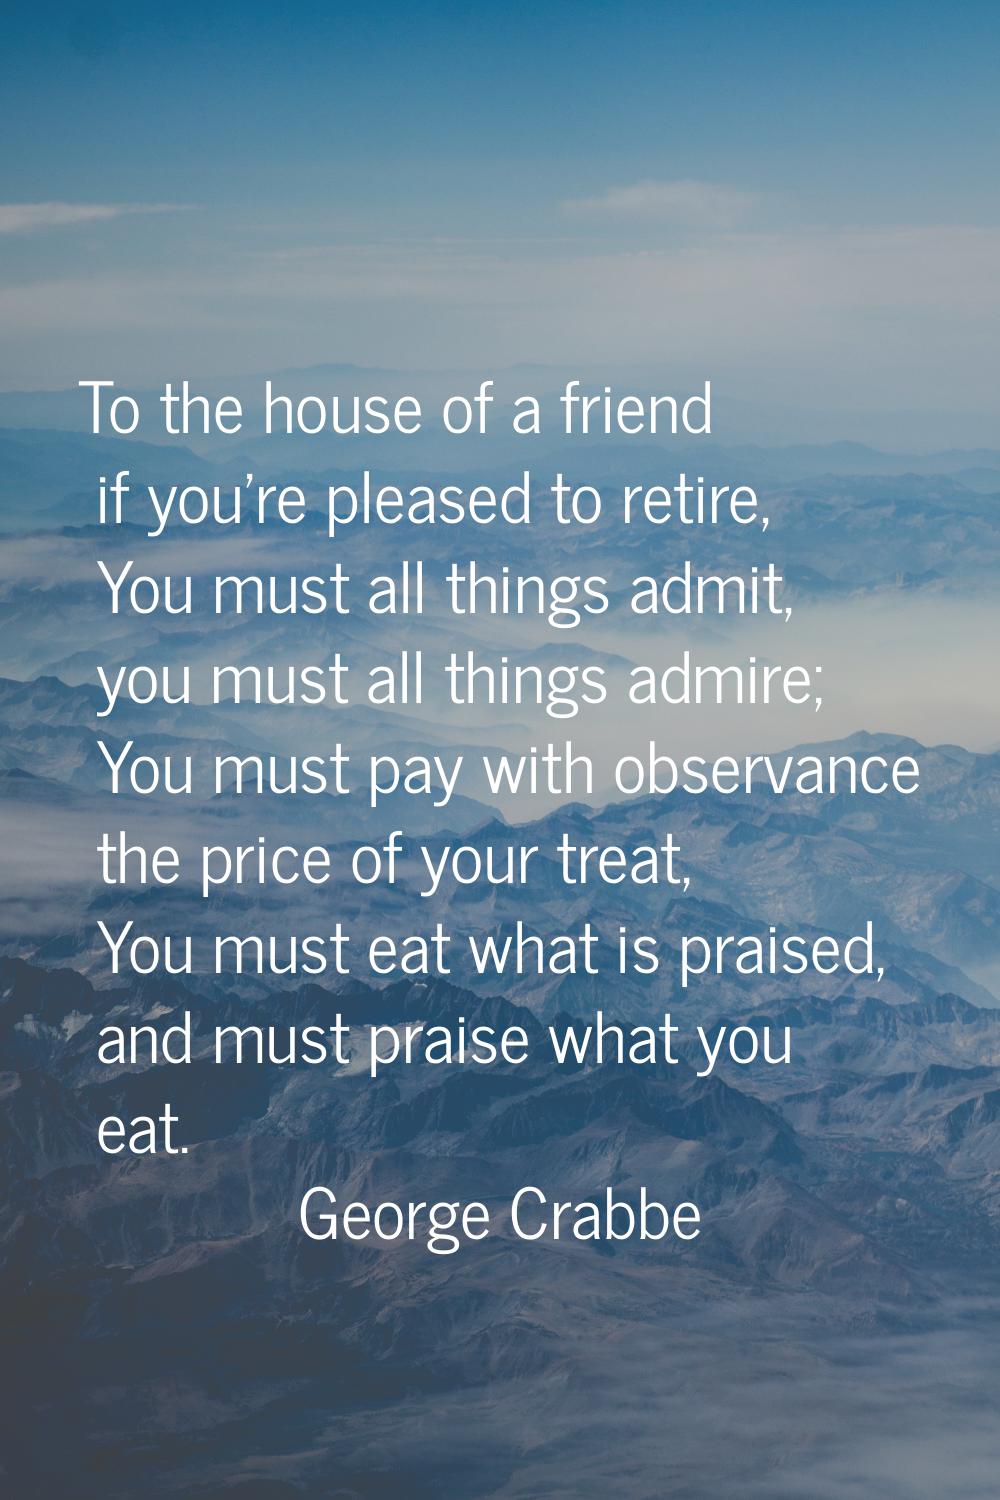 To the house of a friend if you're pleased to retire, You must all things admit, you must all thing